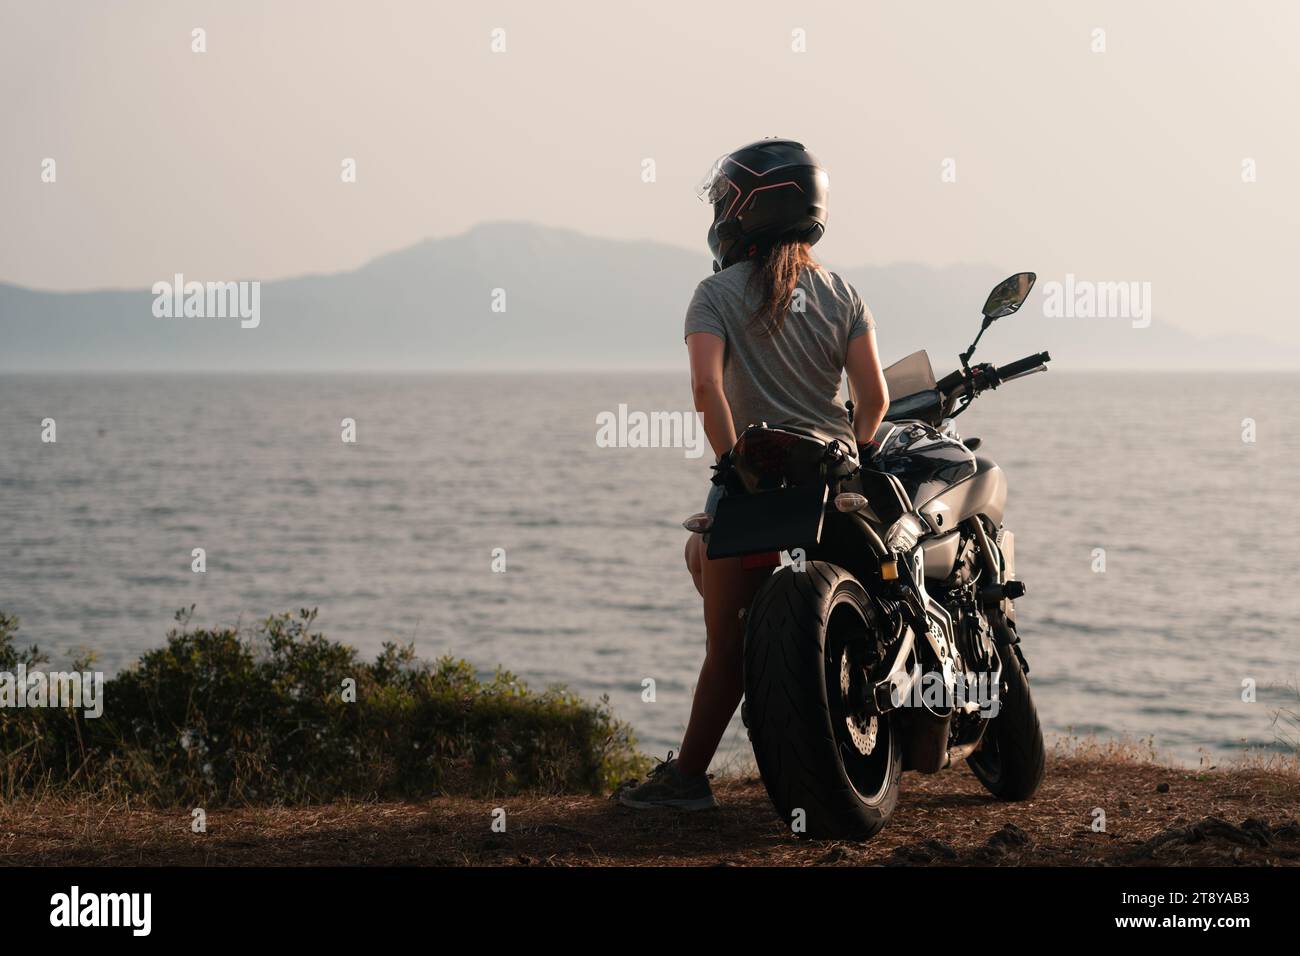 woman leaning on a motorcycle an looking at the sea Stock Photo